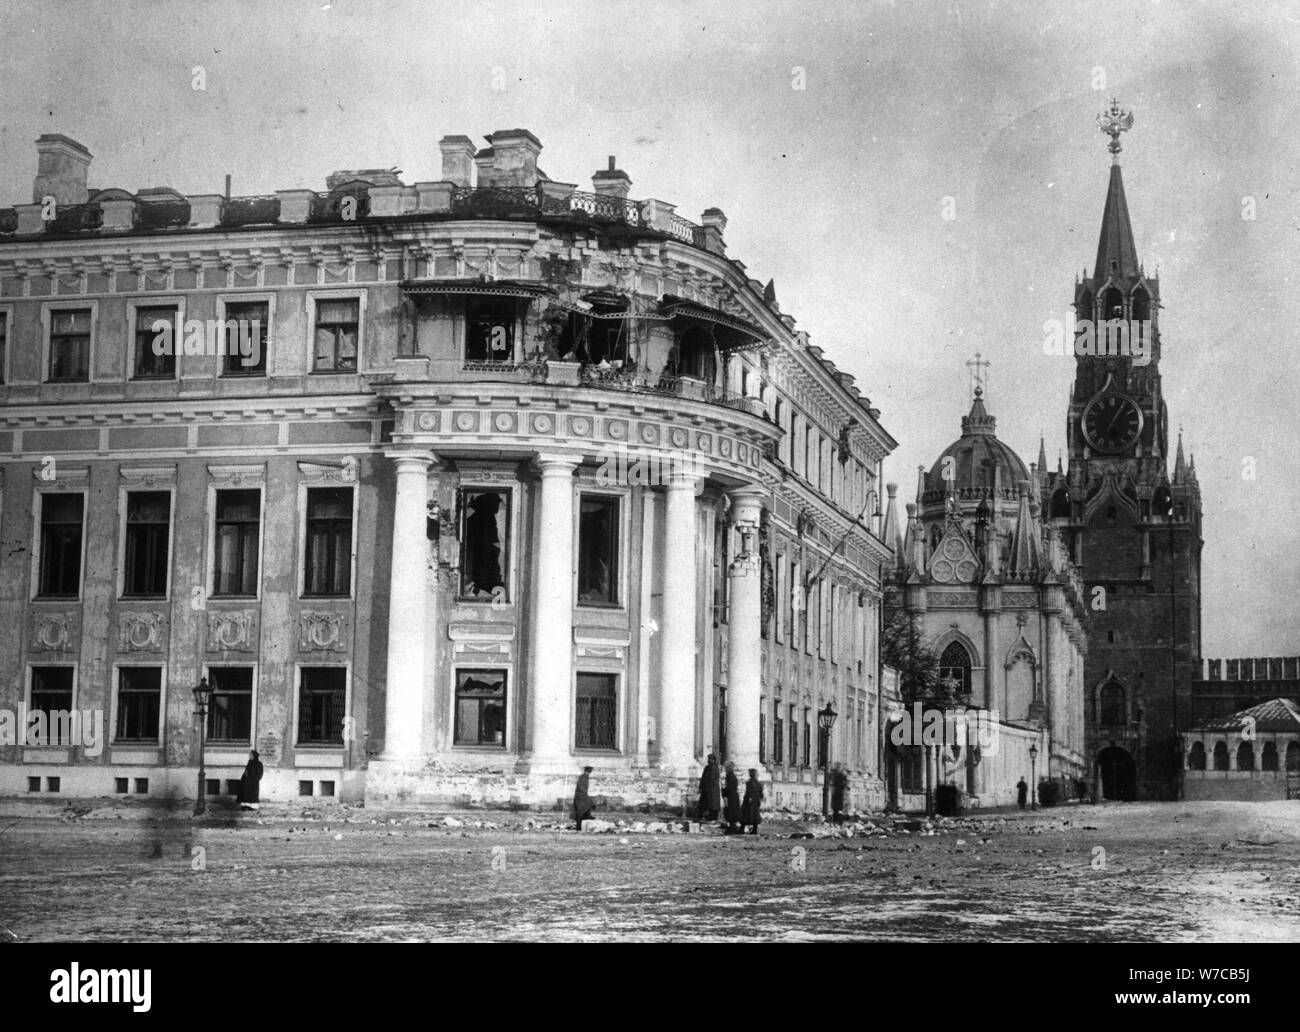 Nicholas Palace in the Moscow Kremlin, damaged during the Russian Revolution, 1917, 1917-1918. Stock Photo